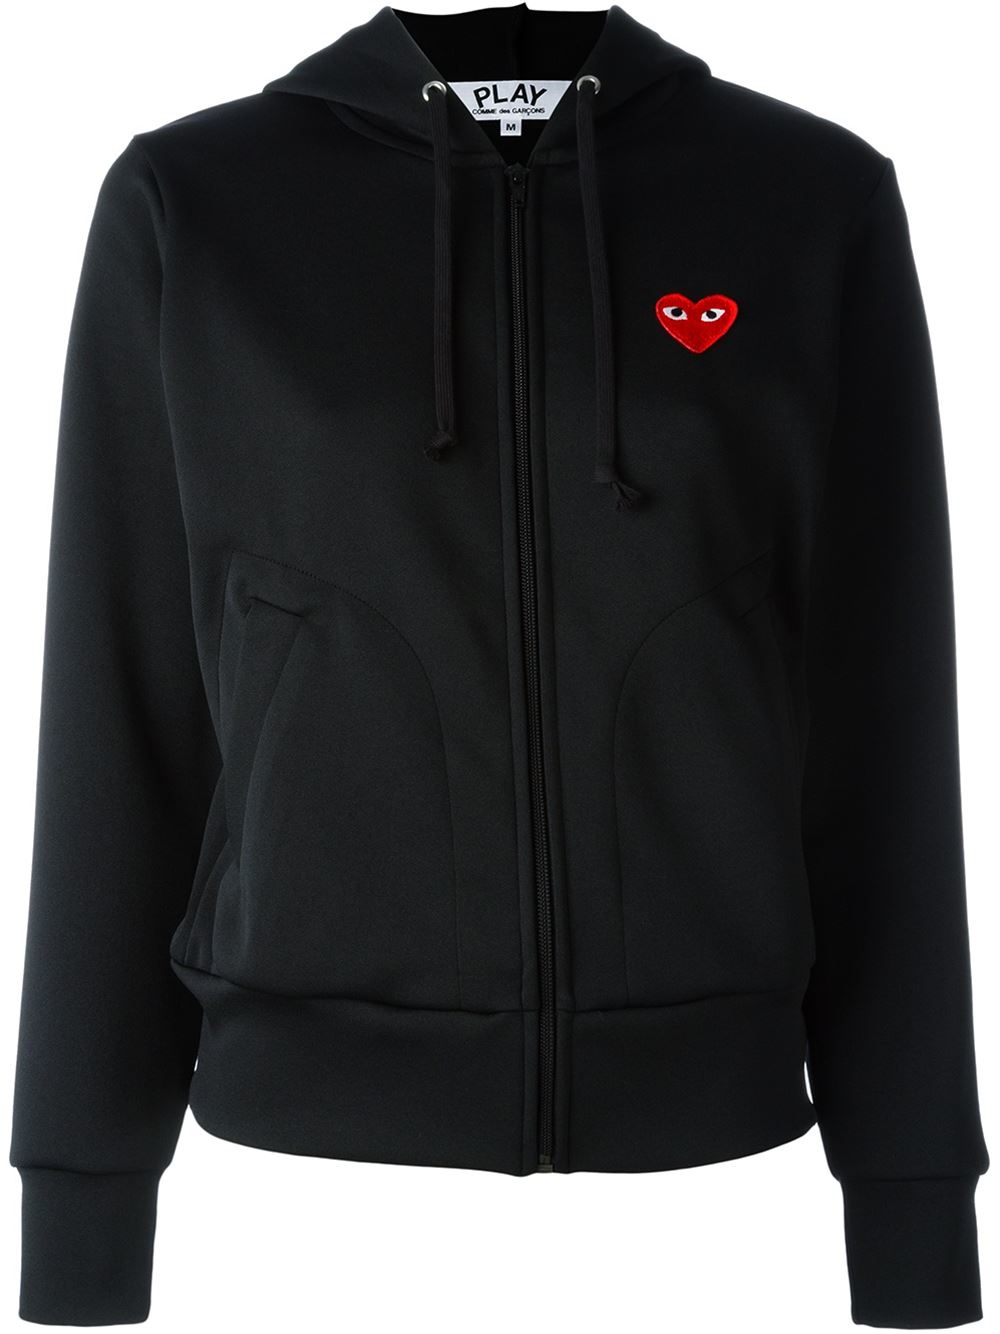 Play comme des garçons Embroidered Heart Hoodie in Black - Save 7% | Lyst